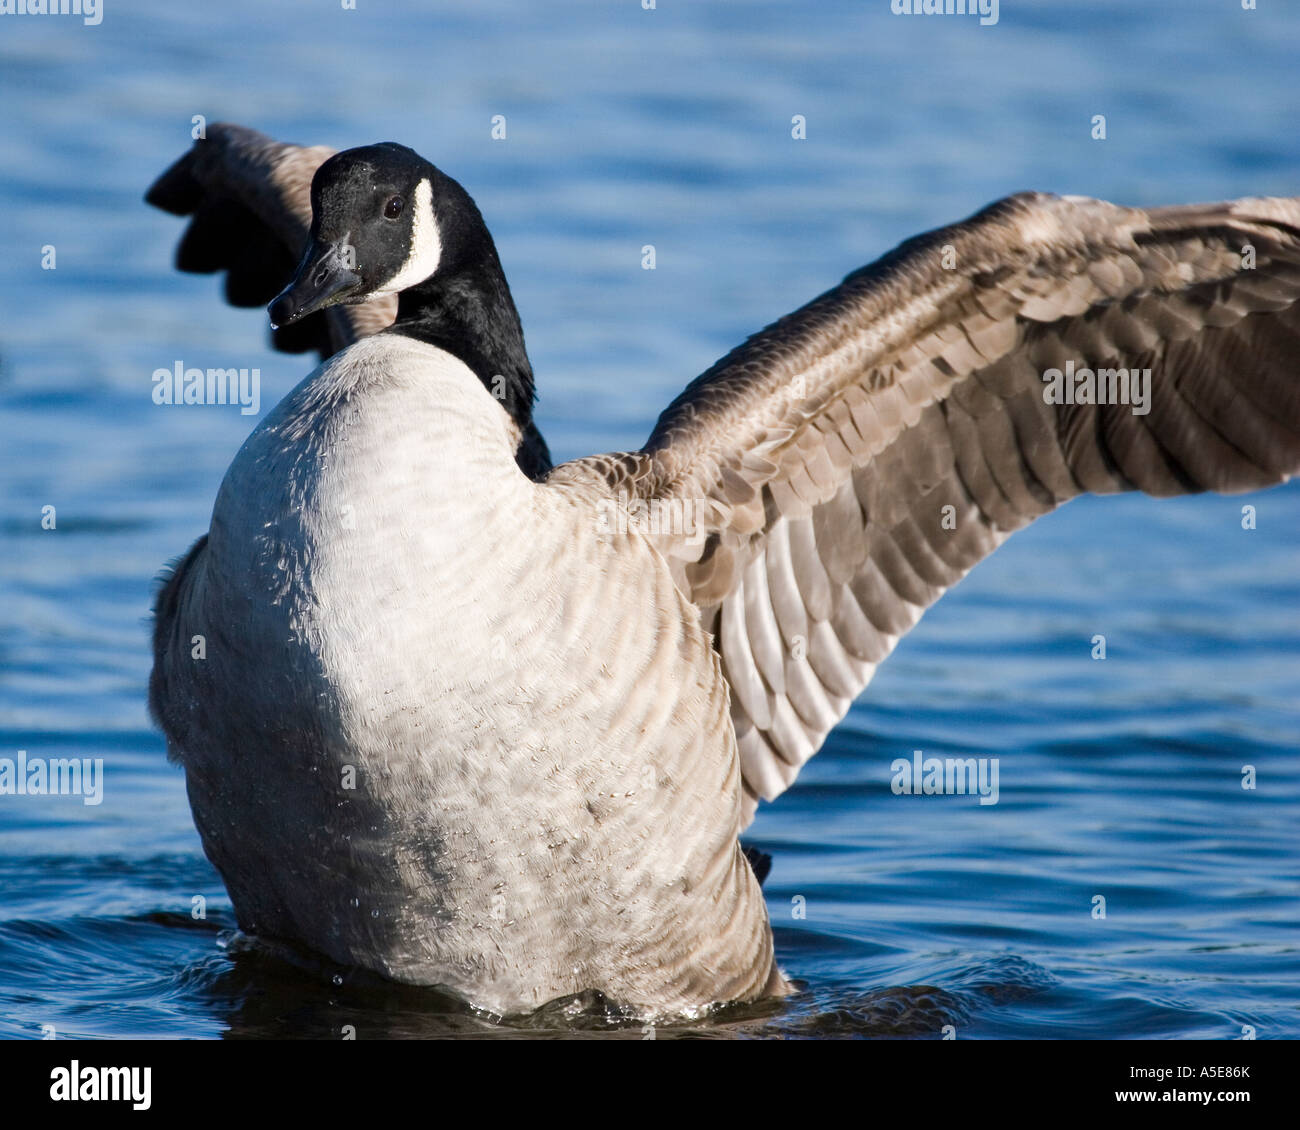 Canada Goose Flapping its Wings Stock Photo